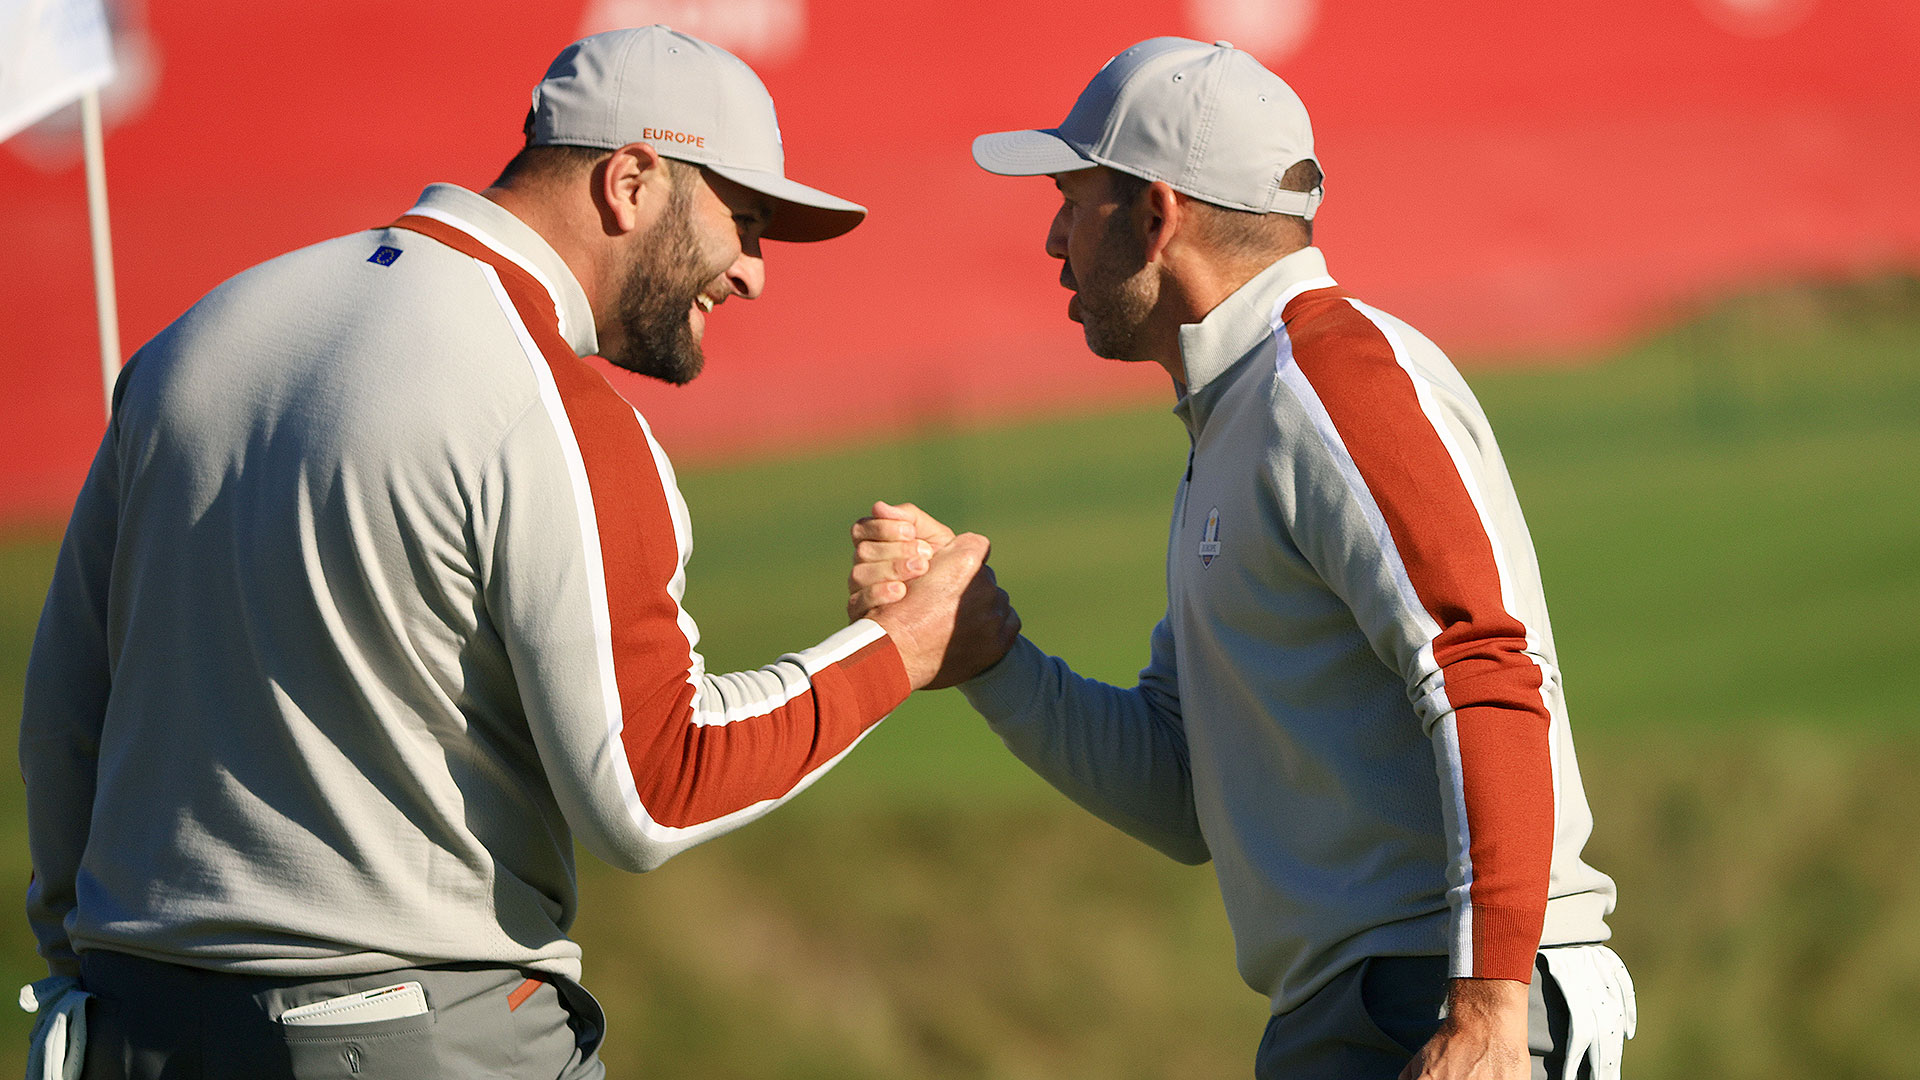 Jon Rahm laments loss of Sergio Garcia in Ryder Cup: ‘Politics’ getting in way of ‘beautiful event’